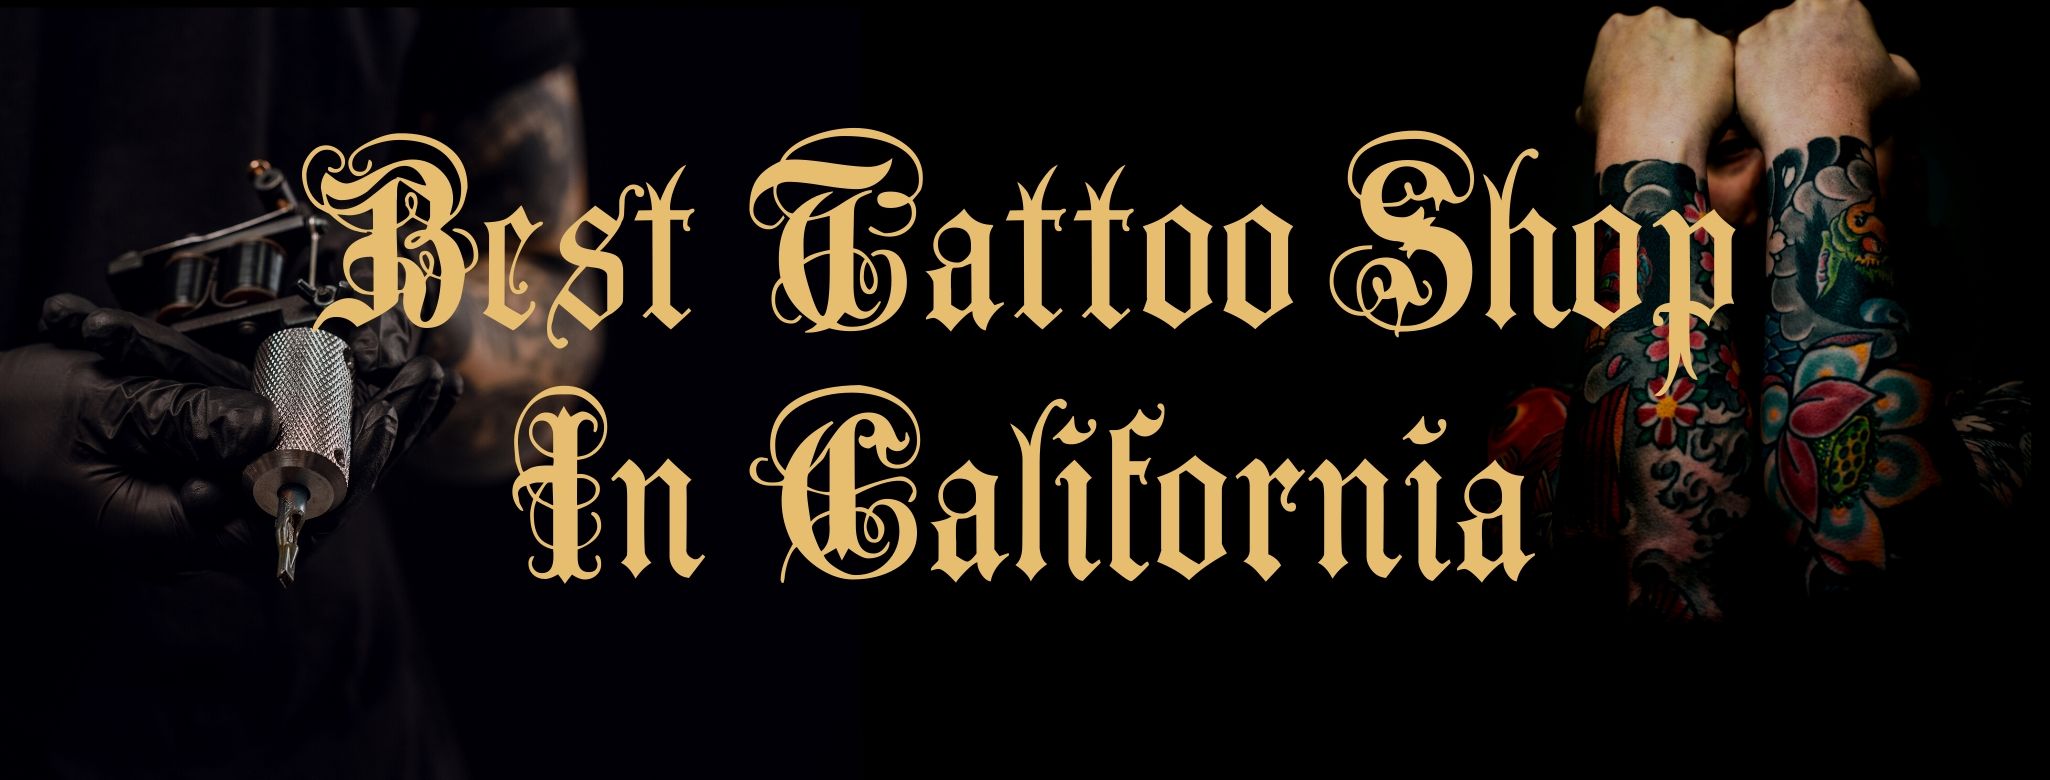 Best Tattoo Shop In California: Why Mr. Inkwells Is The Top Rated Tatt